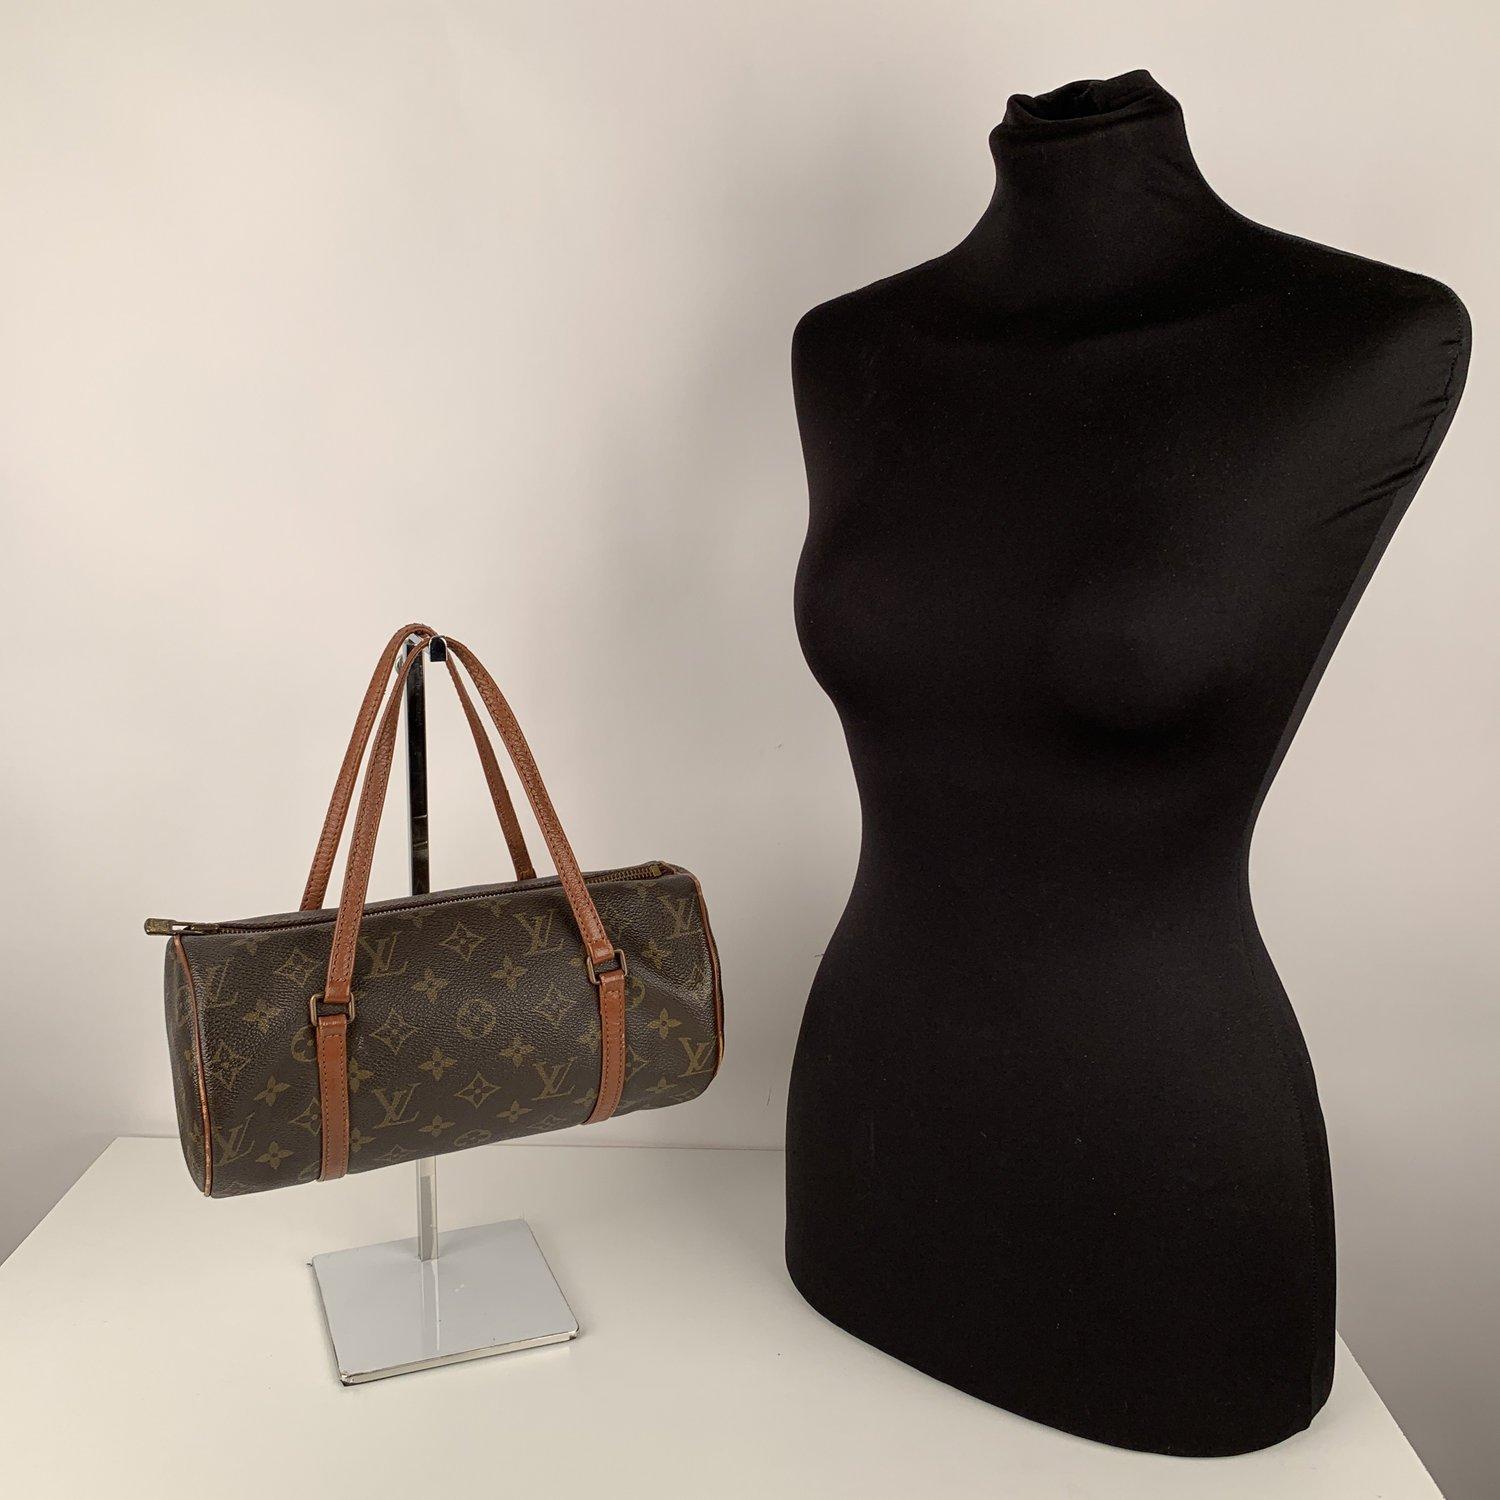 MATERIAL: Canvas COLOR: Brown MODEL: Papillon 25 GENDER: Women SIZE: Medium Condition CONDITION DETAILS: B :GOOD CONDITION - Some light wear of use -Some normal wear of use on leather trim, minimal scratches/wear of use on the internal lining. Some